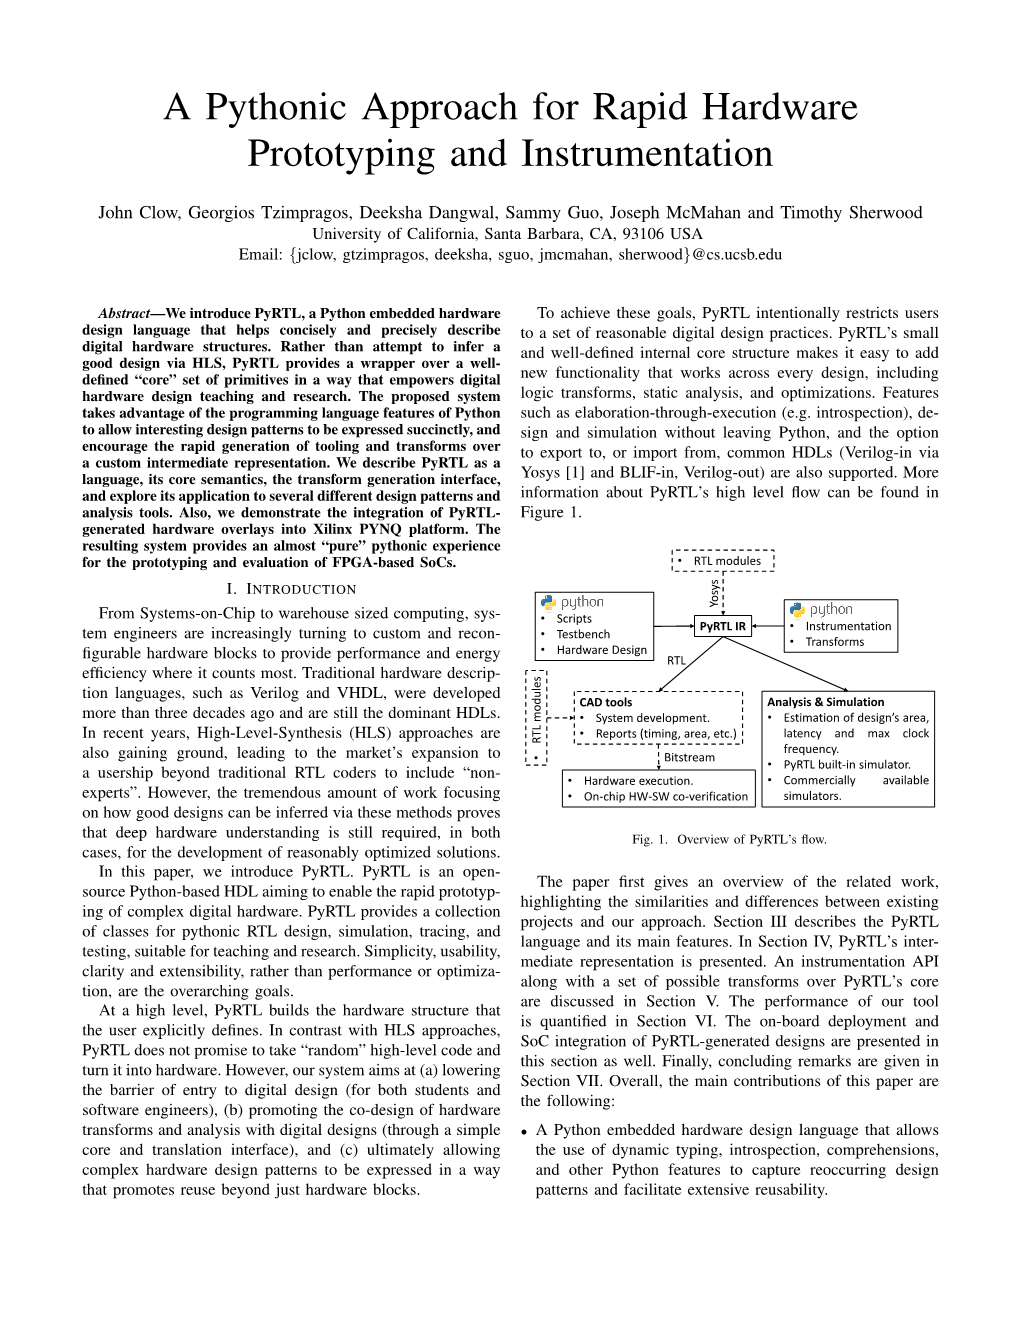 A Pythonic Approach for Rapid Hardware Prototyping and Instrumentation